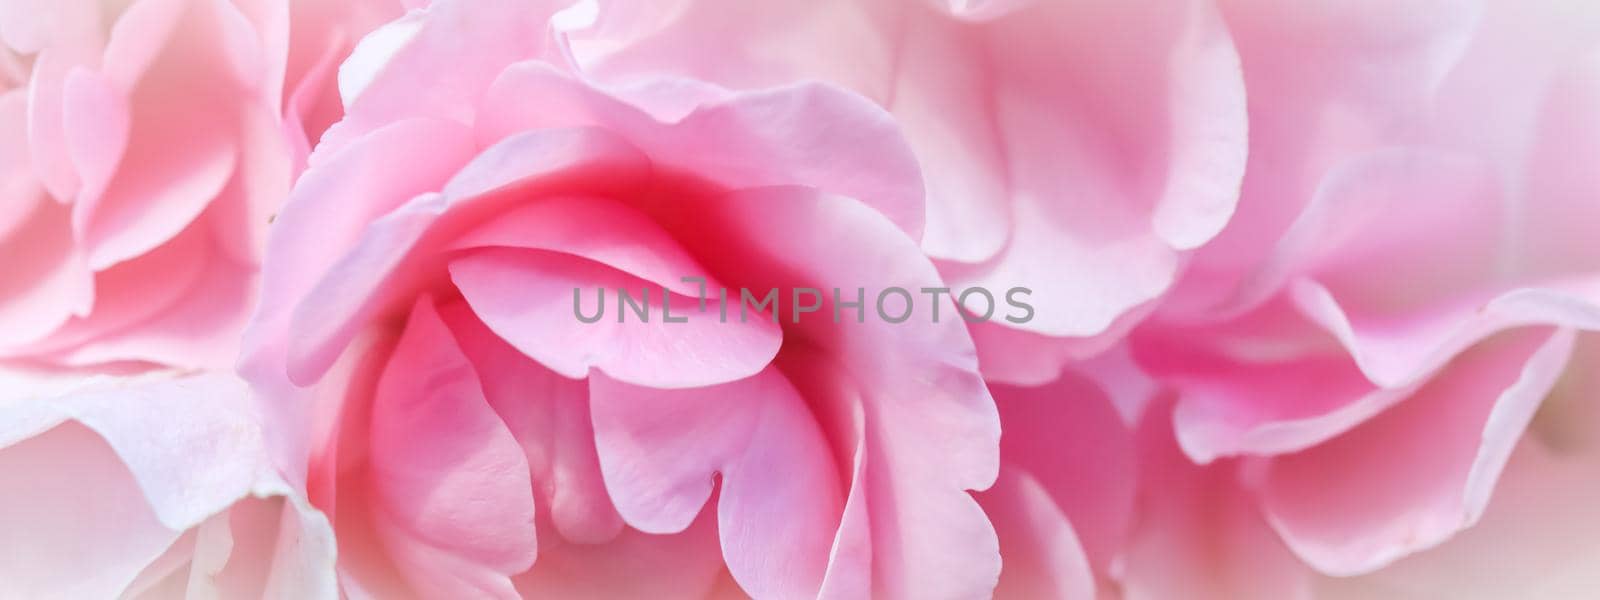 Botanical concept, wedding invitation card - Soft focus, abstract floral background, pink rose flower. Macro flowers backdrop for holiday brand design